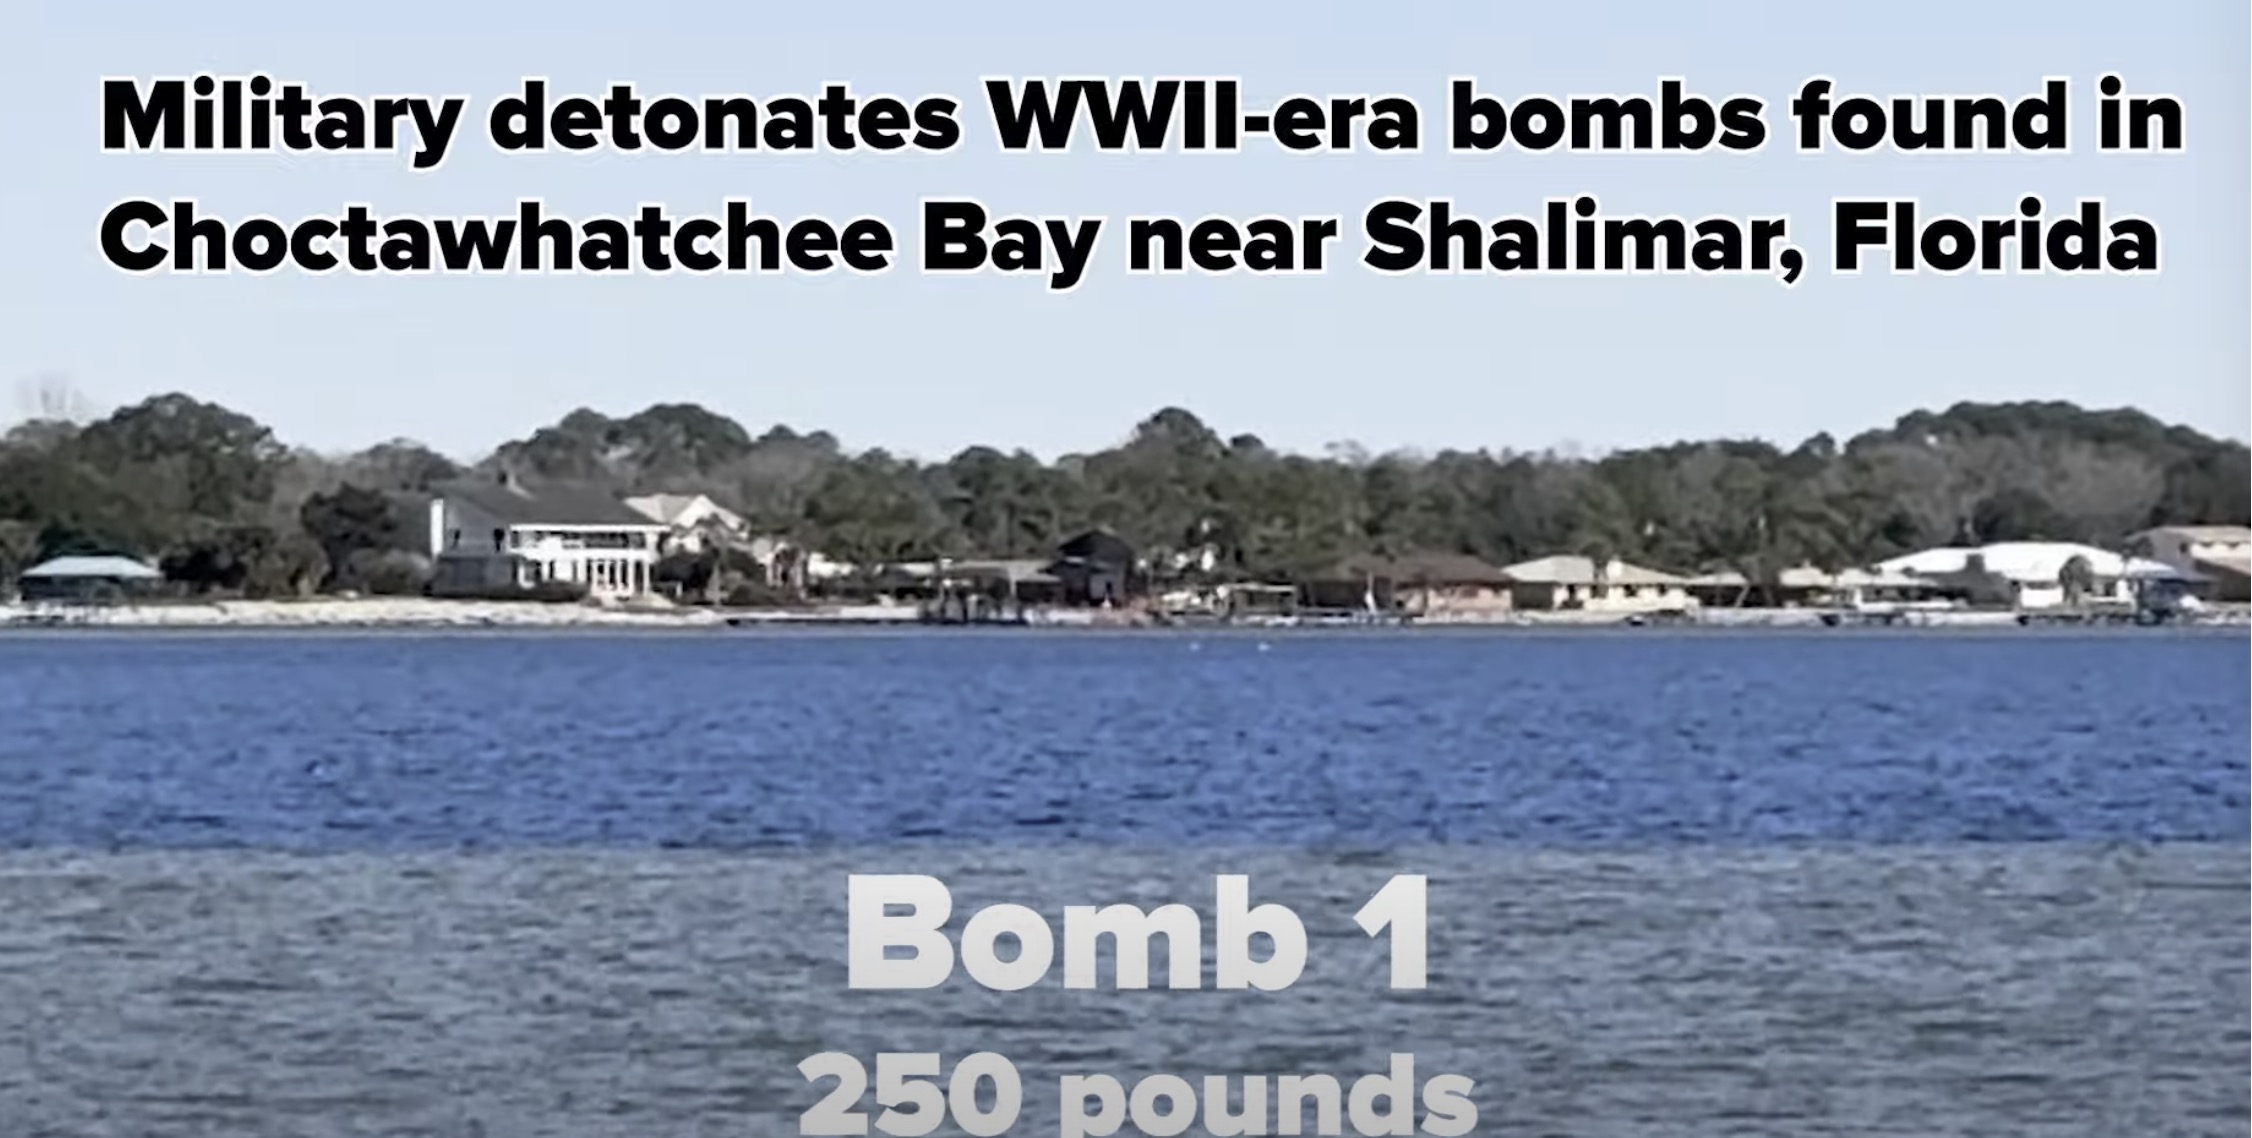 3 Bombs from WWII found in Florida Bay and Detonated by EOD Technicians